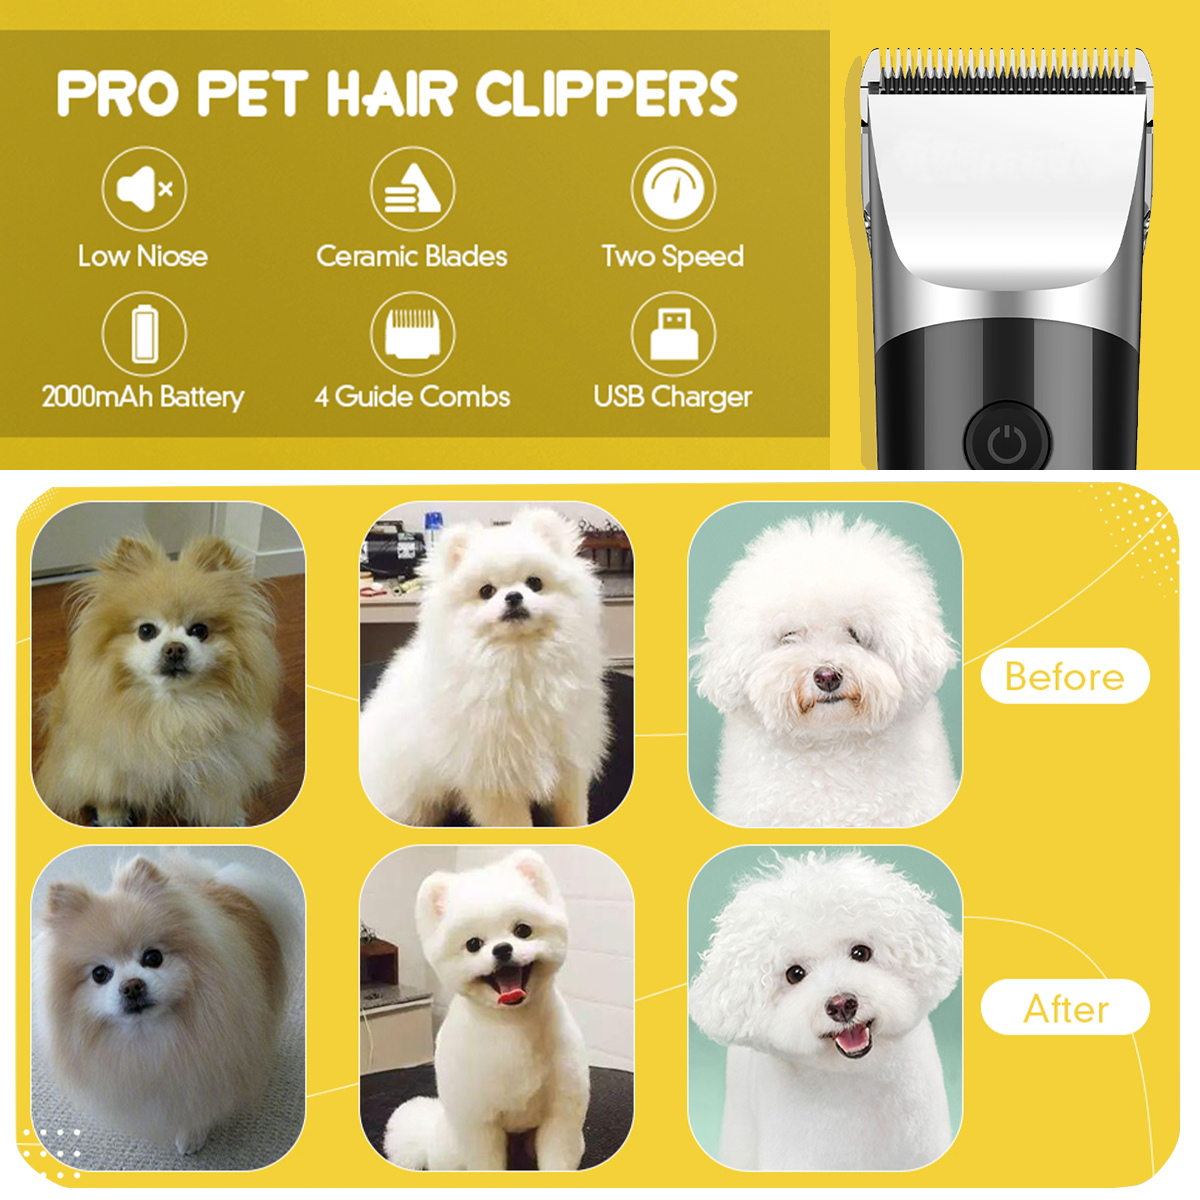 8W-Dog-Hair-Clipper-Professional-Rechargeable-Cordless-Pet-Grooming-Kit-Low-Noise-Pet-Cat-Supplies-Q-1952398-8